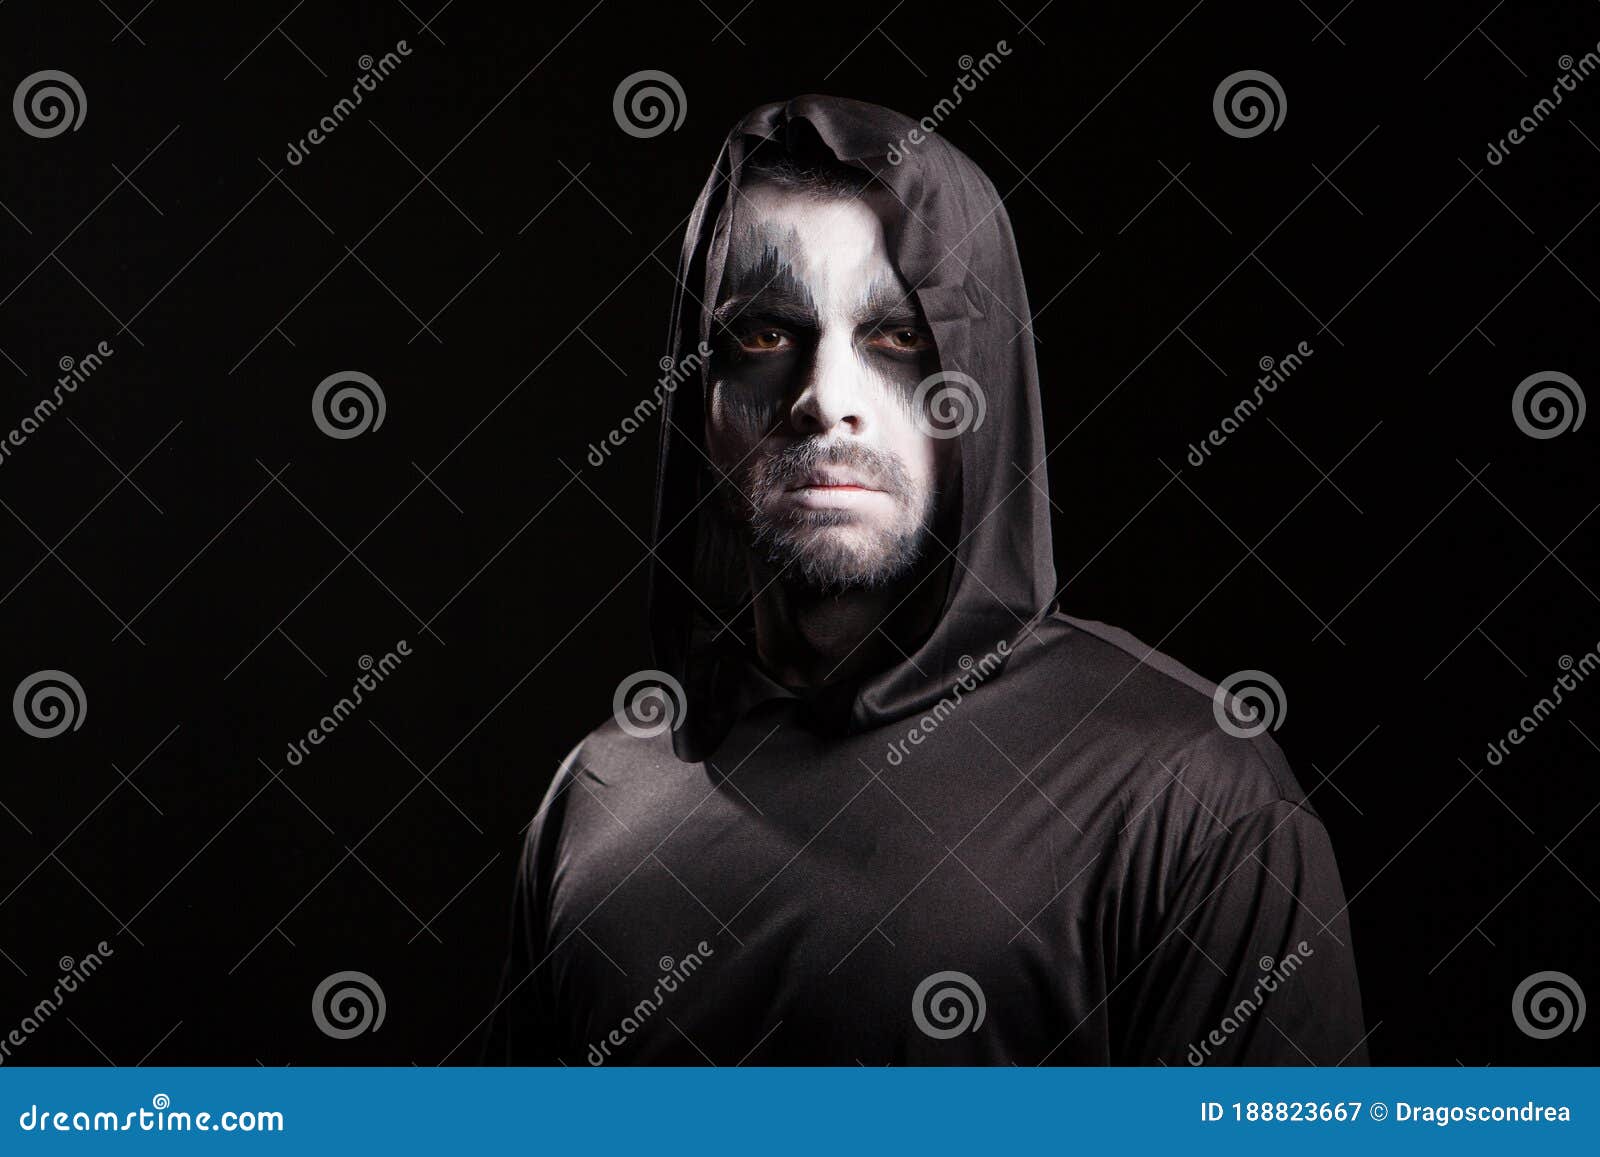 Young Man Looking Serious into the Camera Dressed Up Like Grim Reaper ...